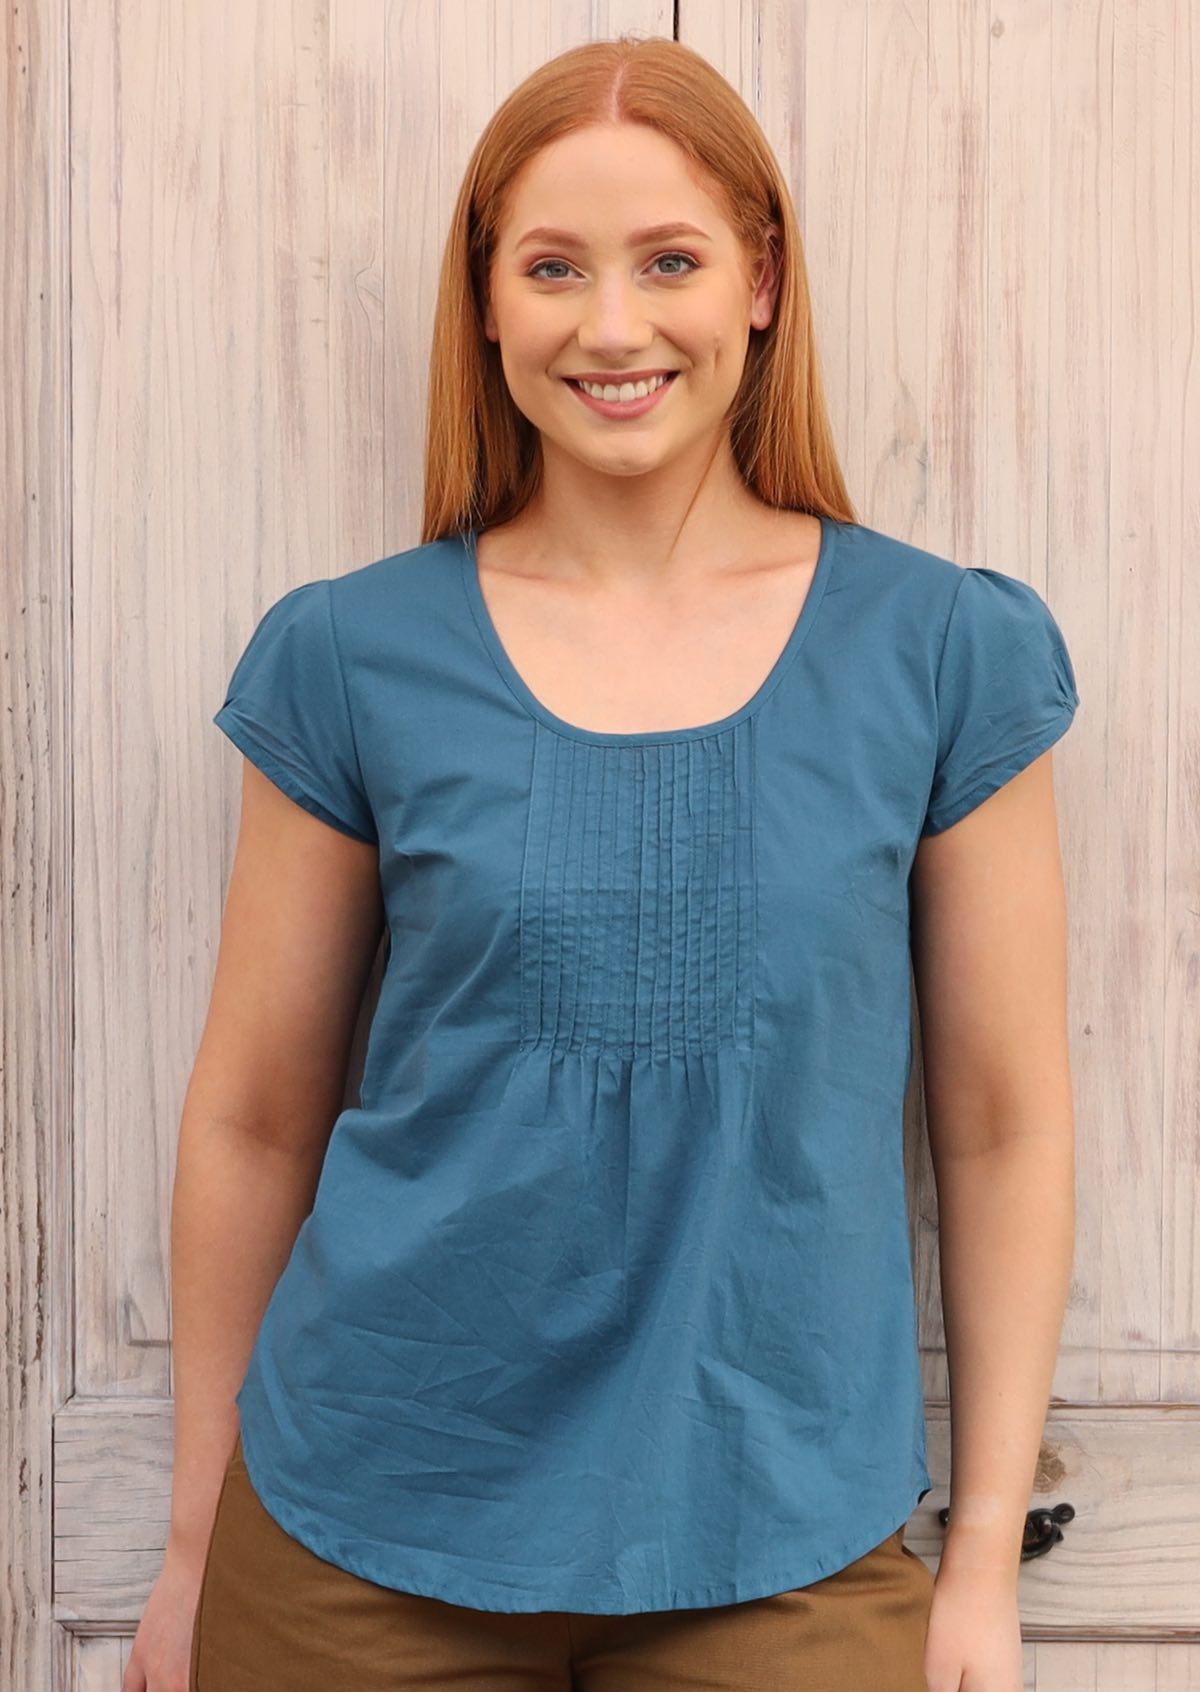 Model wears a top with cap sleeves and a U-shaped neckline.